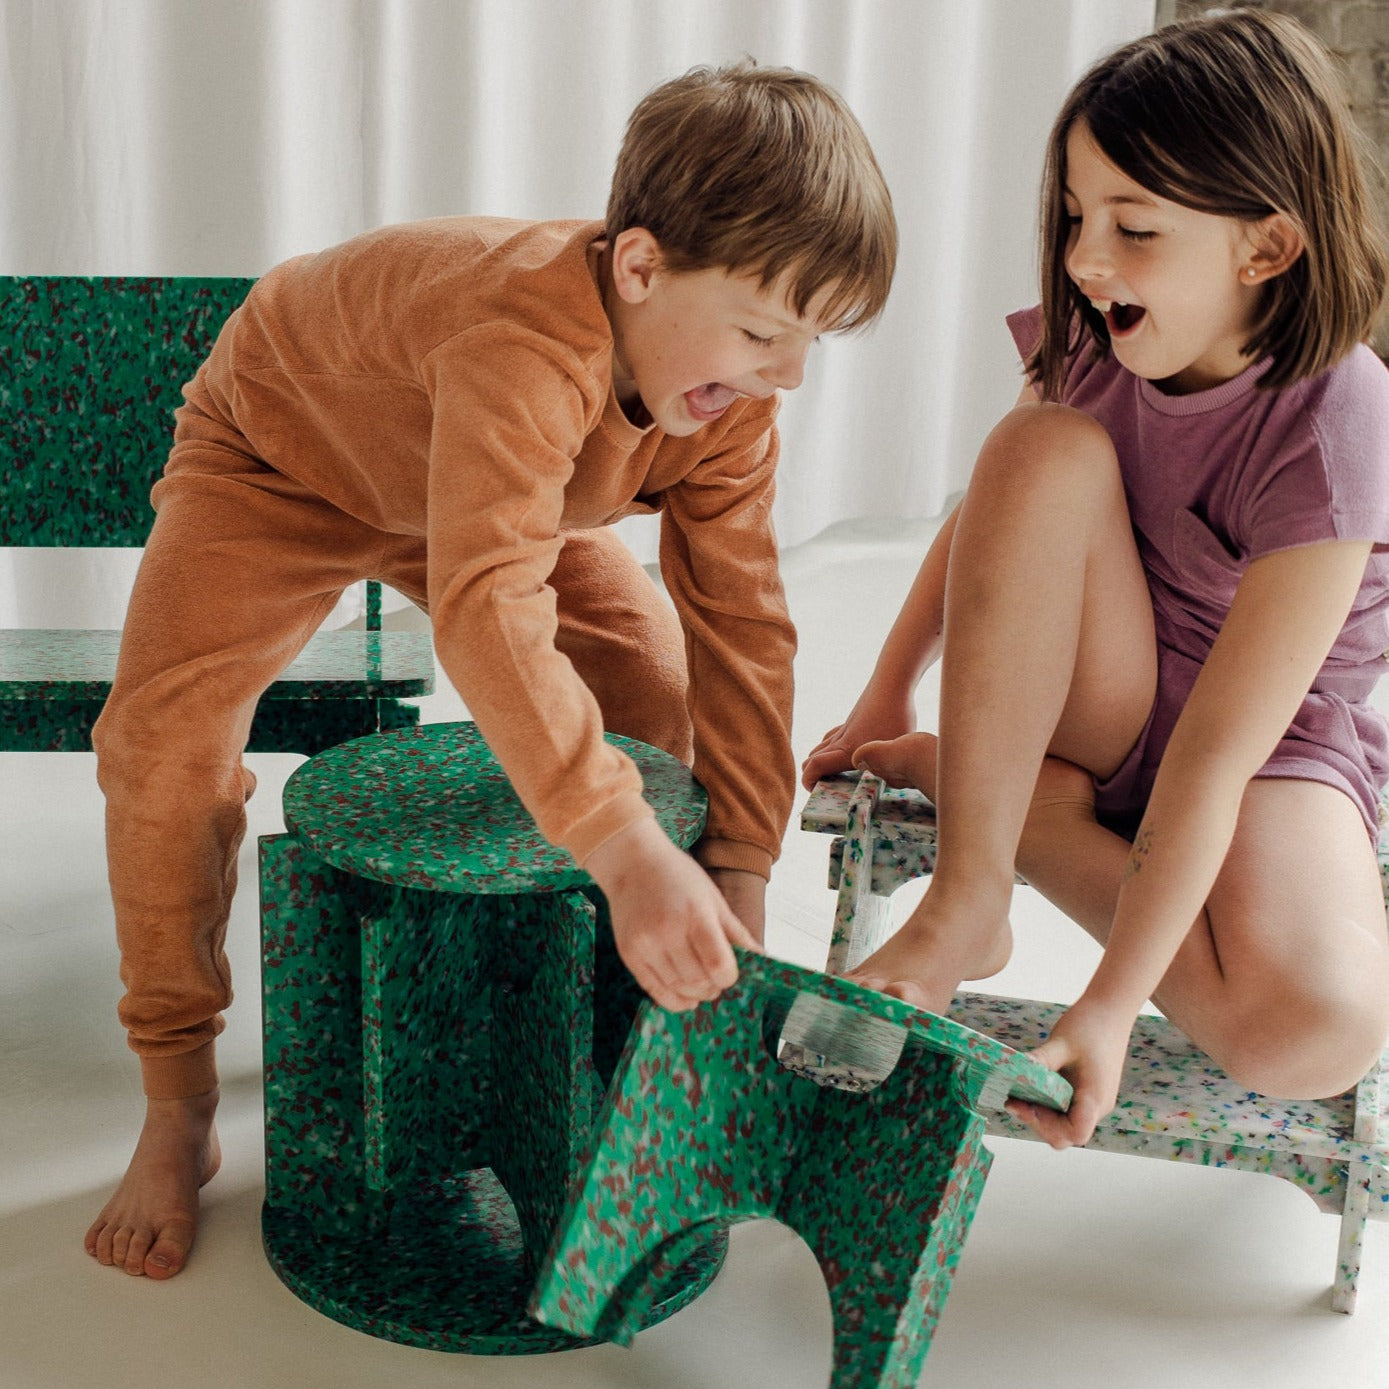 KIDS PLAYING WITH STOOLS BY THE MINIMONO PROJECT - BRAND FOR ECO FRIENDLY - PLAYFUL - MULTI FUNCTIONAL - SUSTAINABLE - HIGH QUALITY - DESIGN FURNITURE FROM RECYCLED PLASTIC FOR BOTH ADULT AND CHILDREN MADE IN BERLIN GERMANY